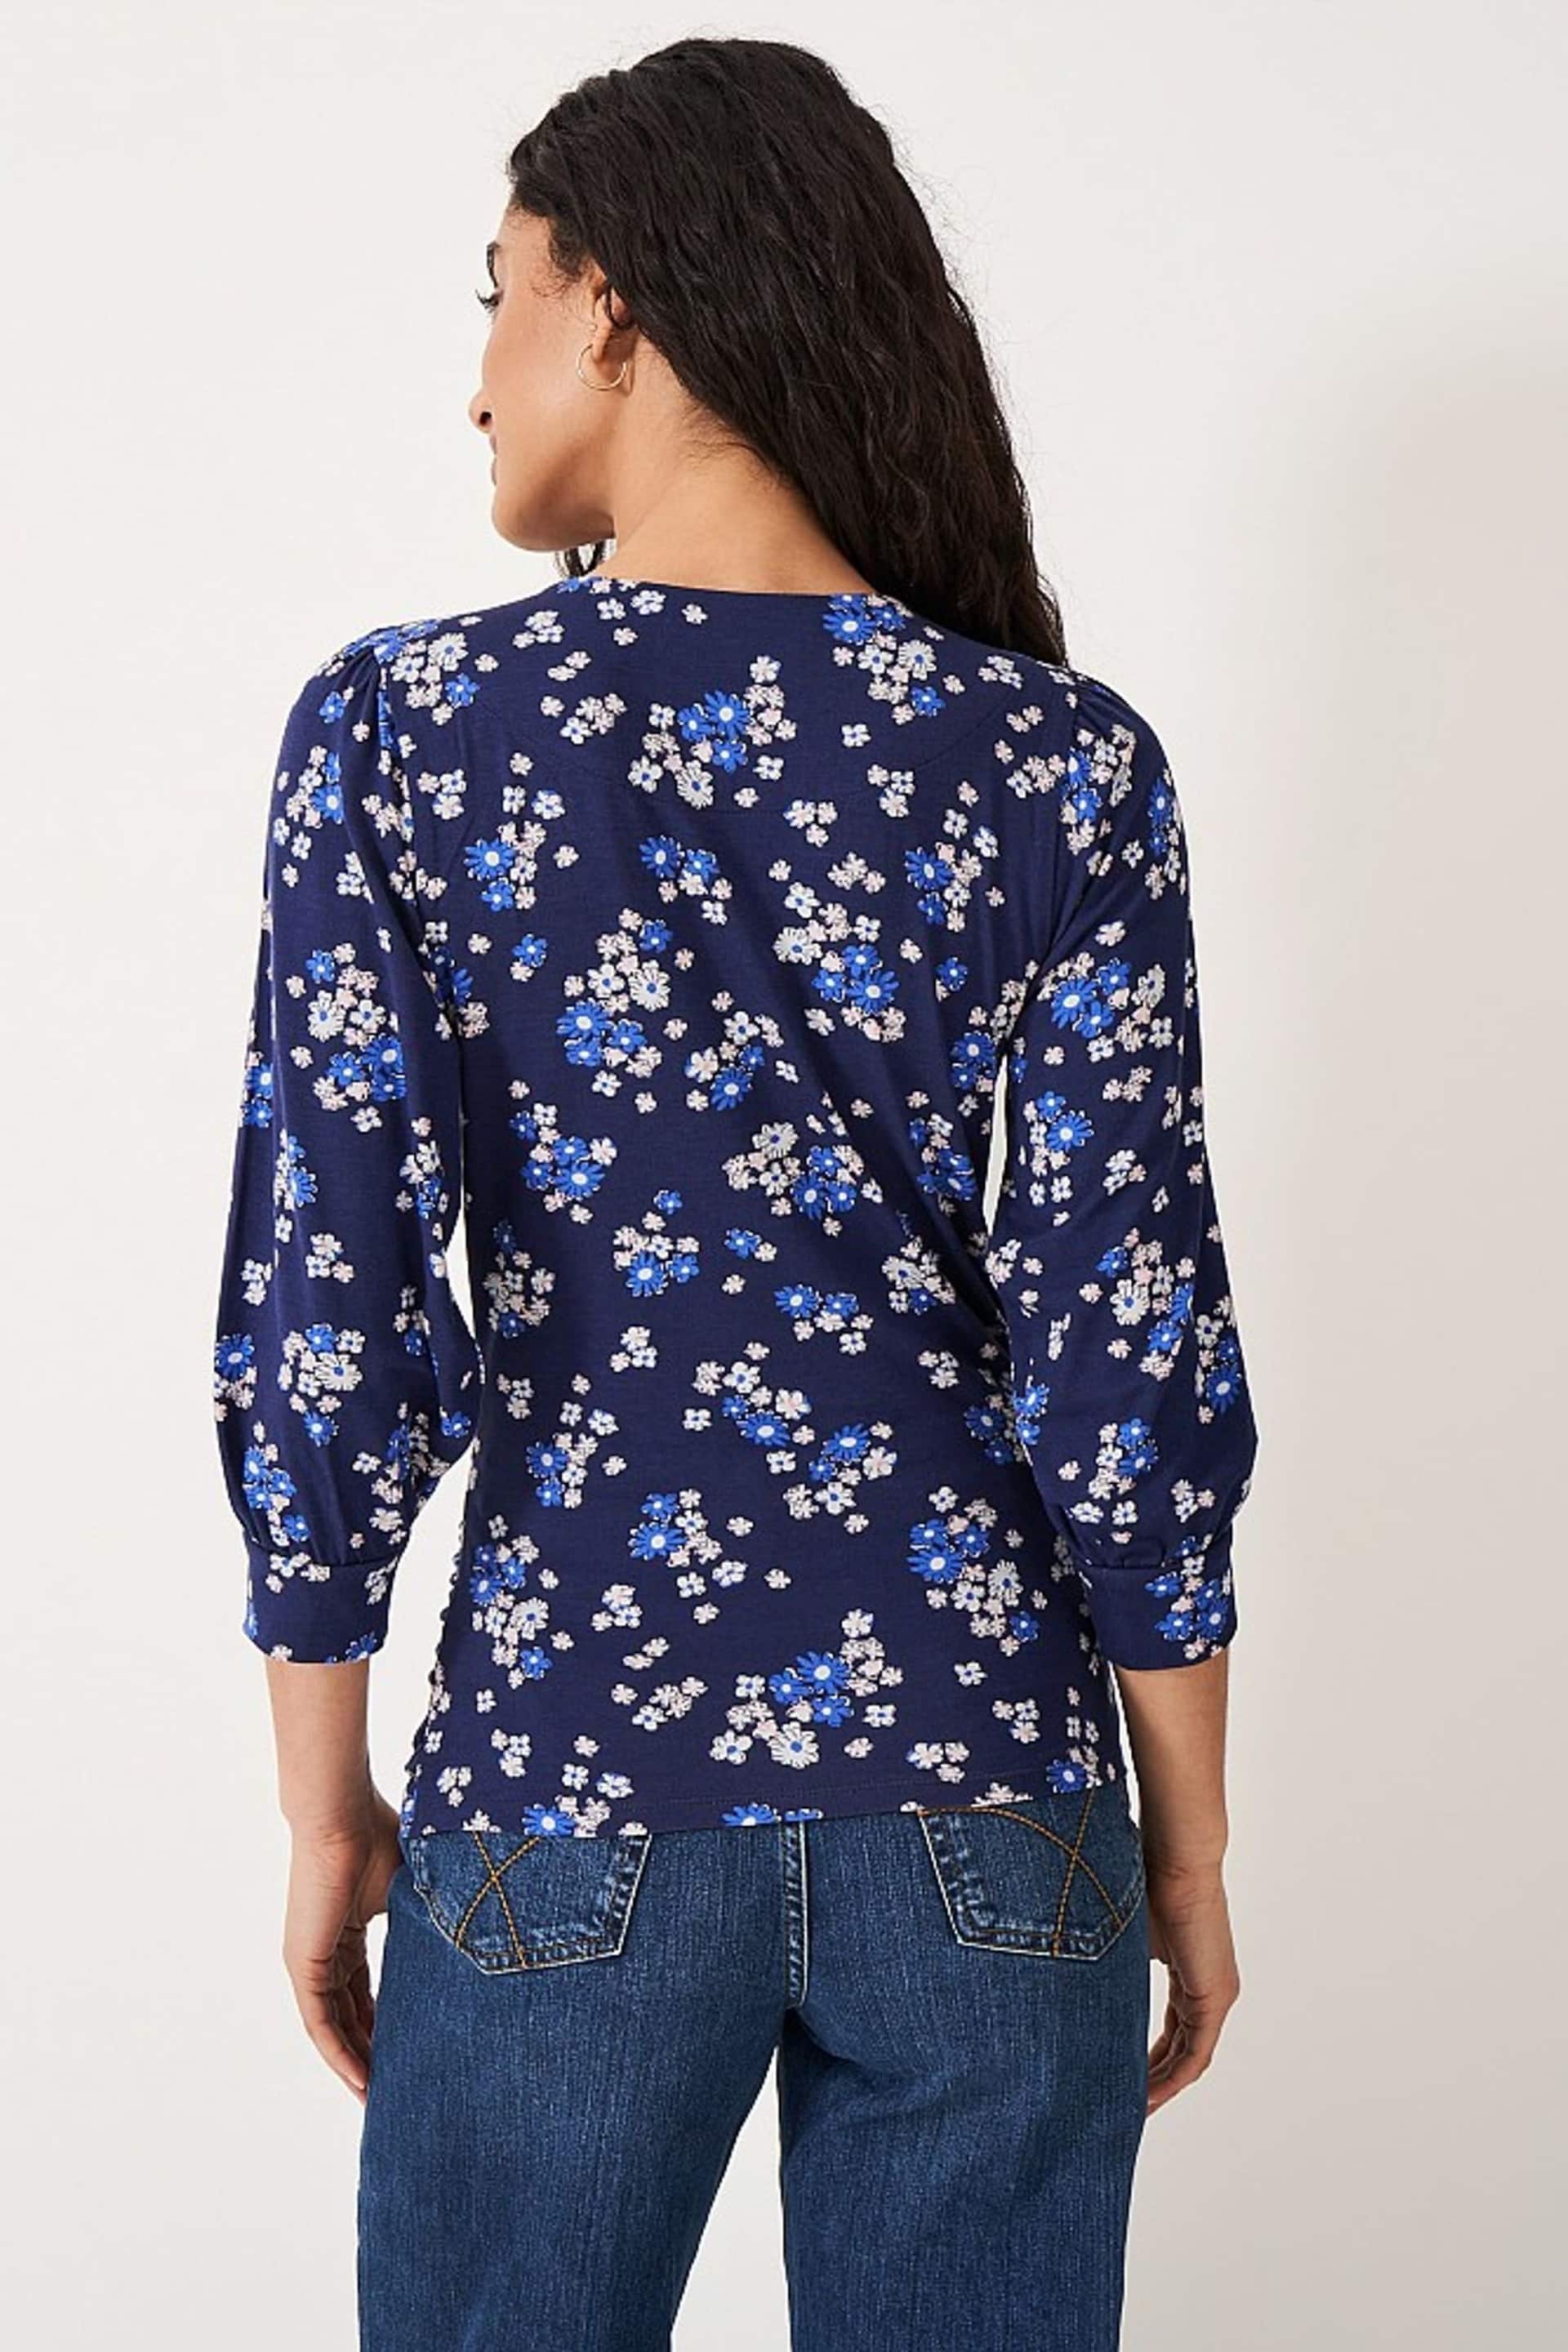 Crew Clothing Floral Jersey Wrap Top - Image 3 of 4